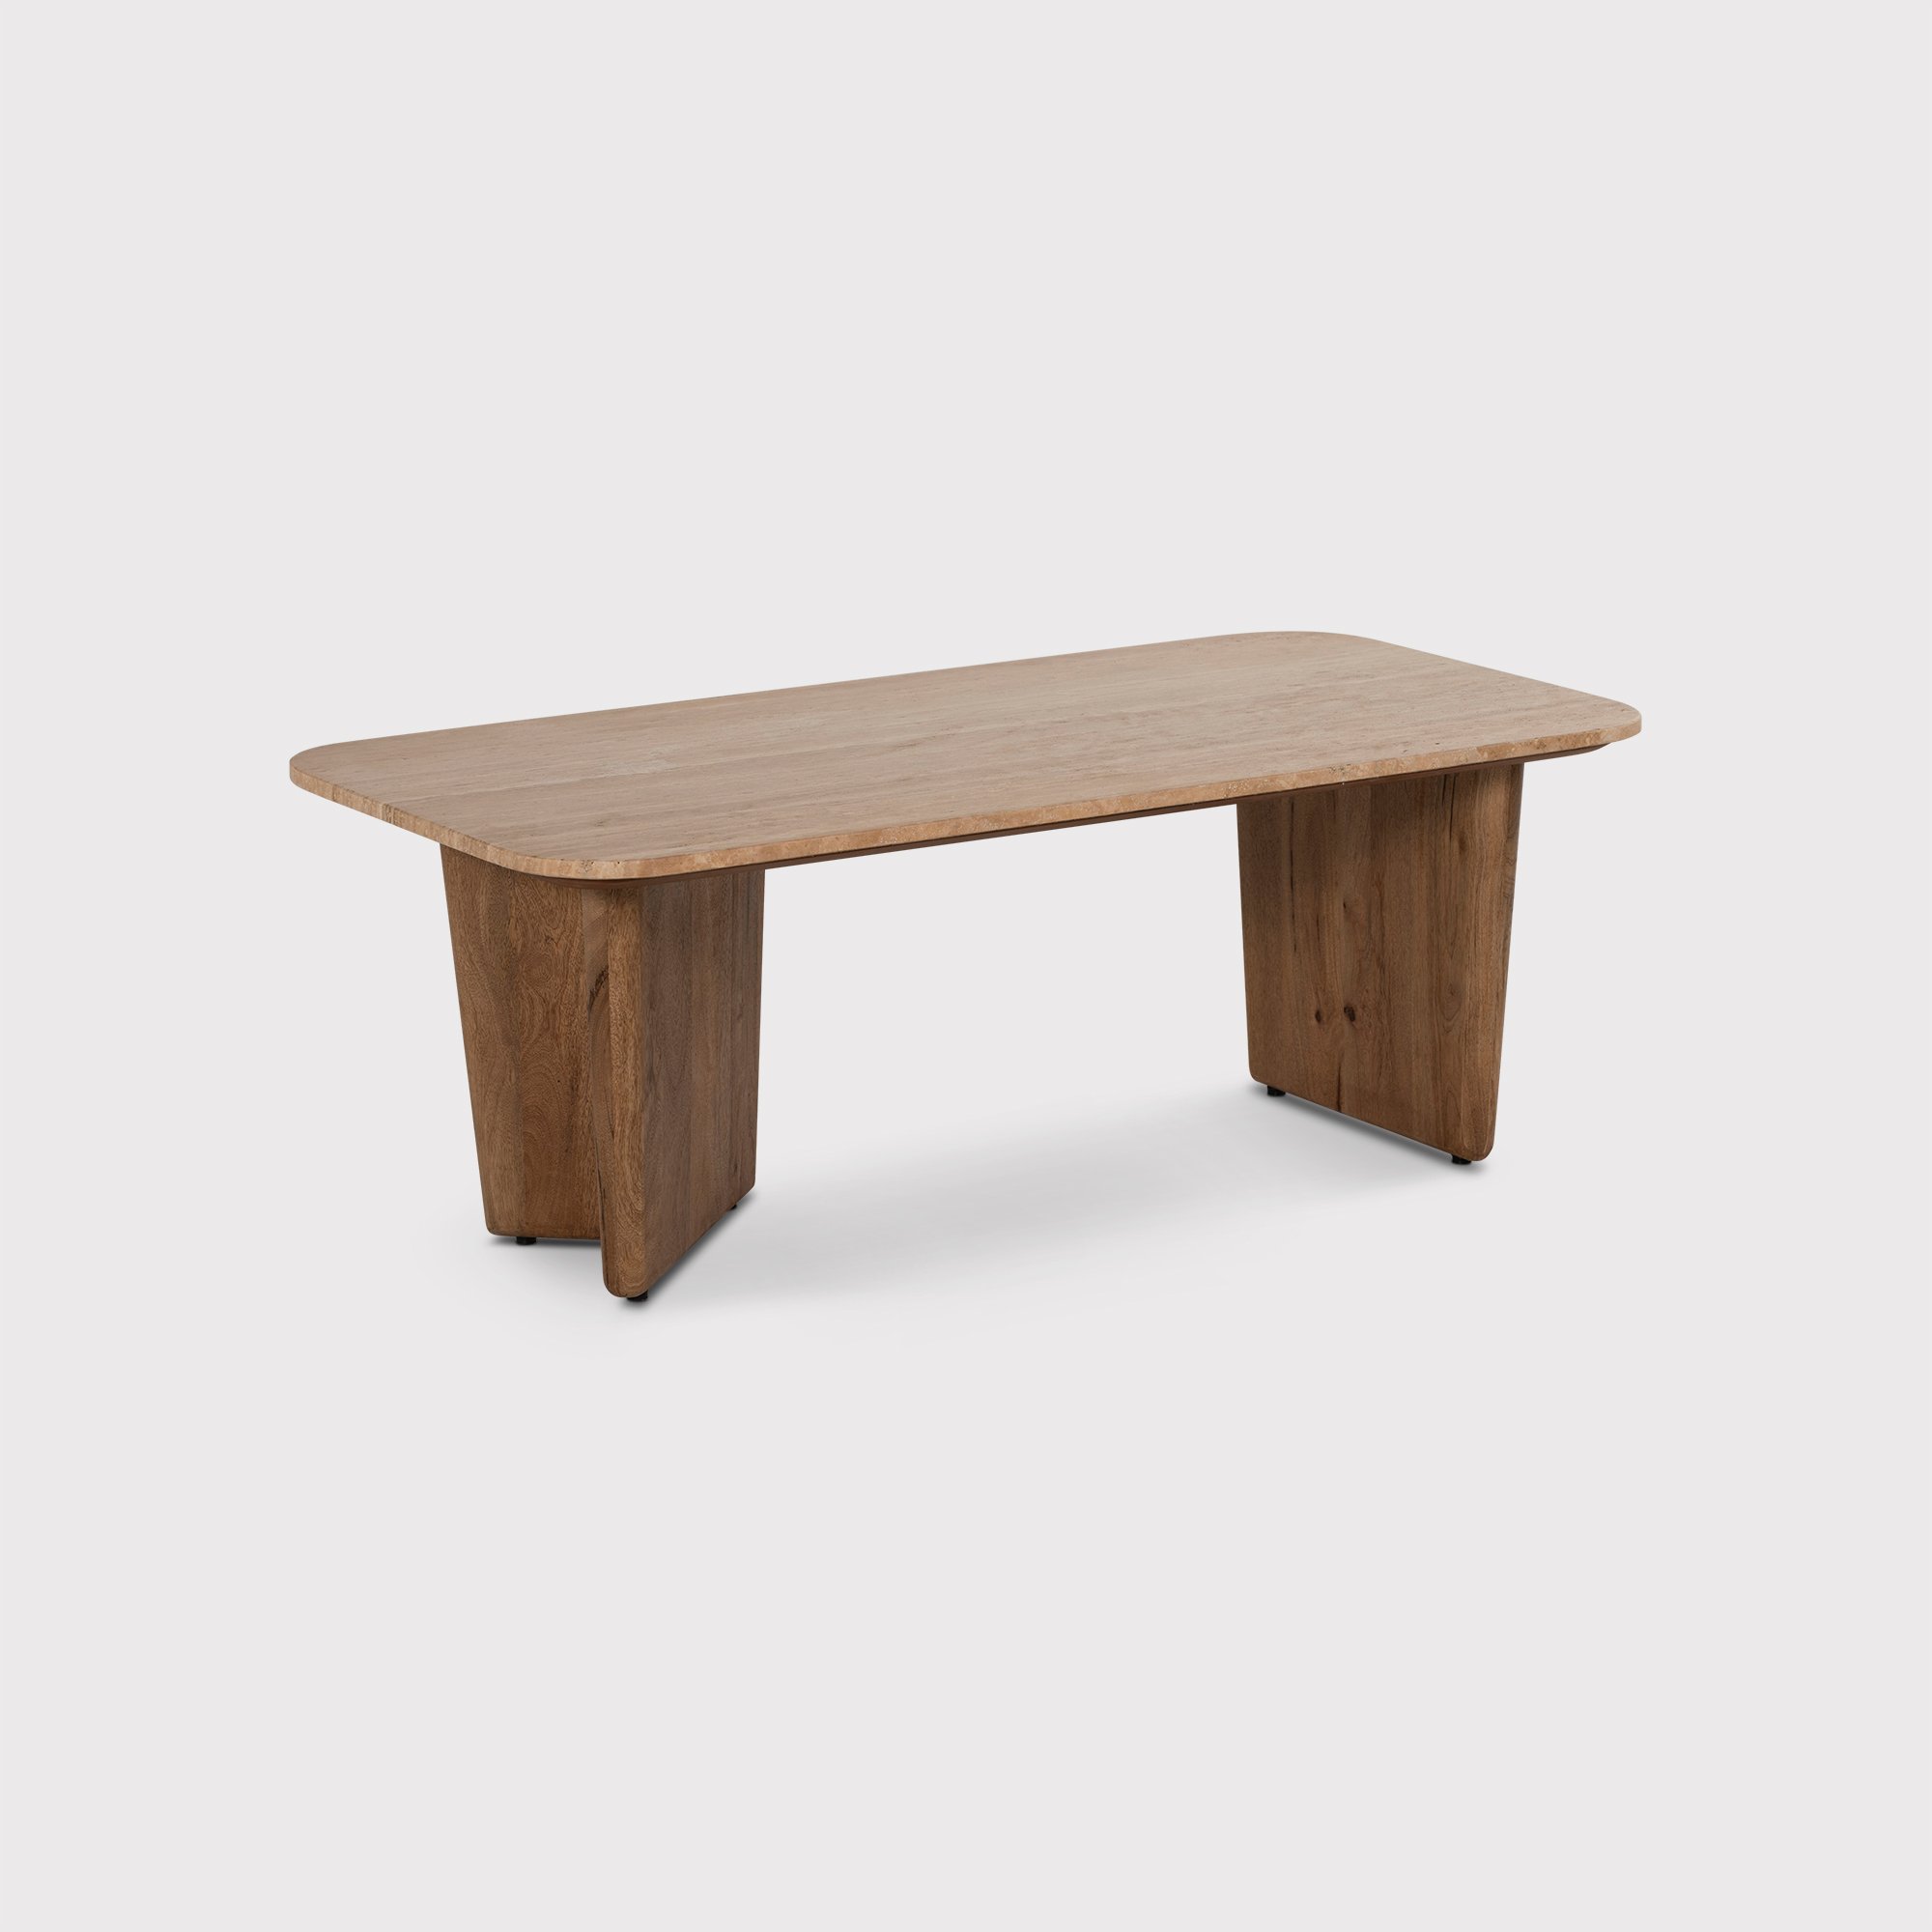 Vito Coffee Table, Brown | Barker & Stonehouse